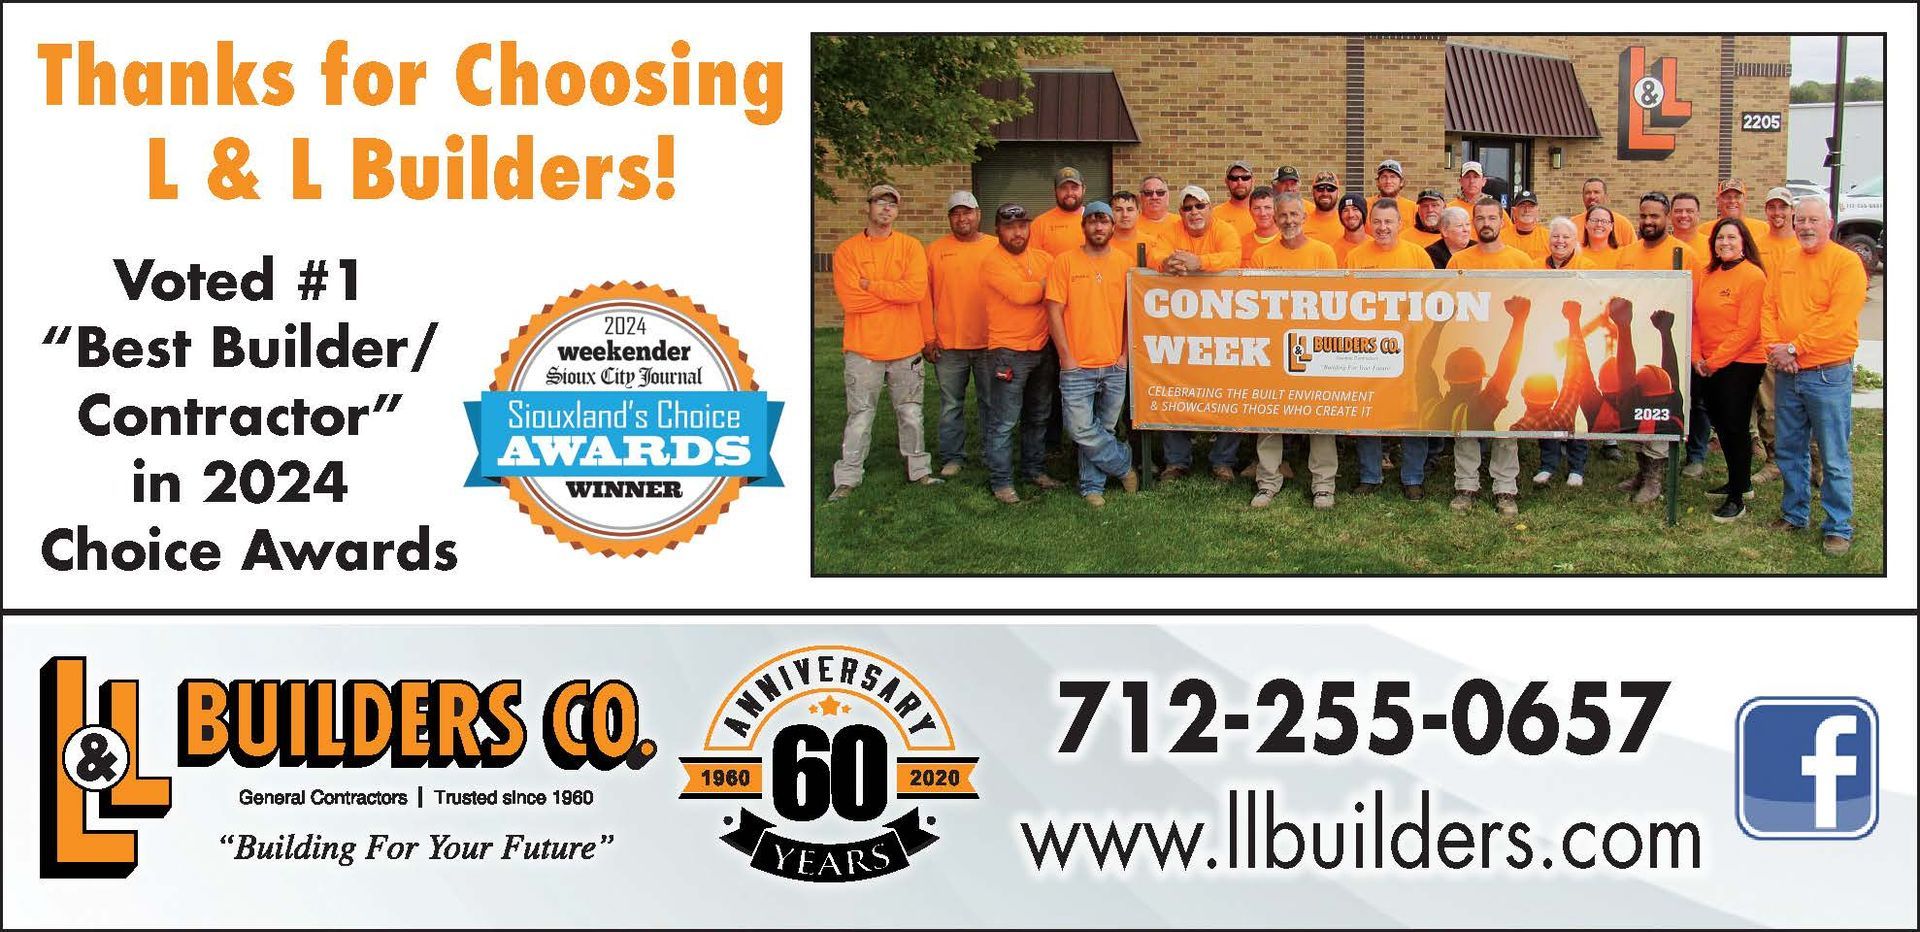 Company Employees — Sioux City, IA — L & L Builders Co.